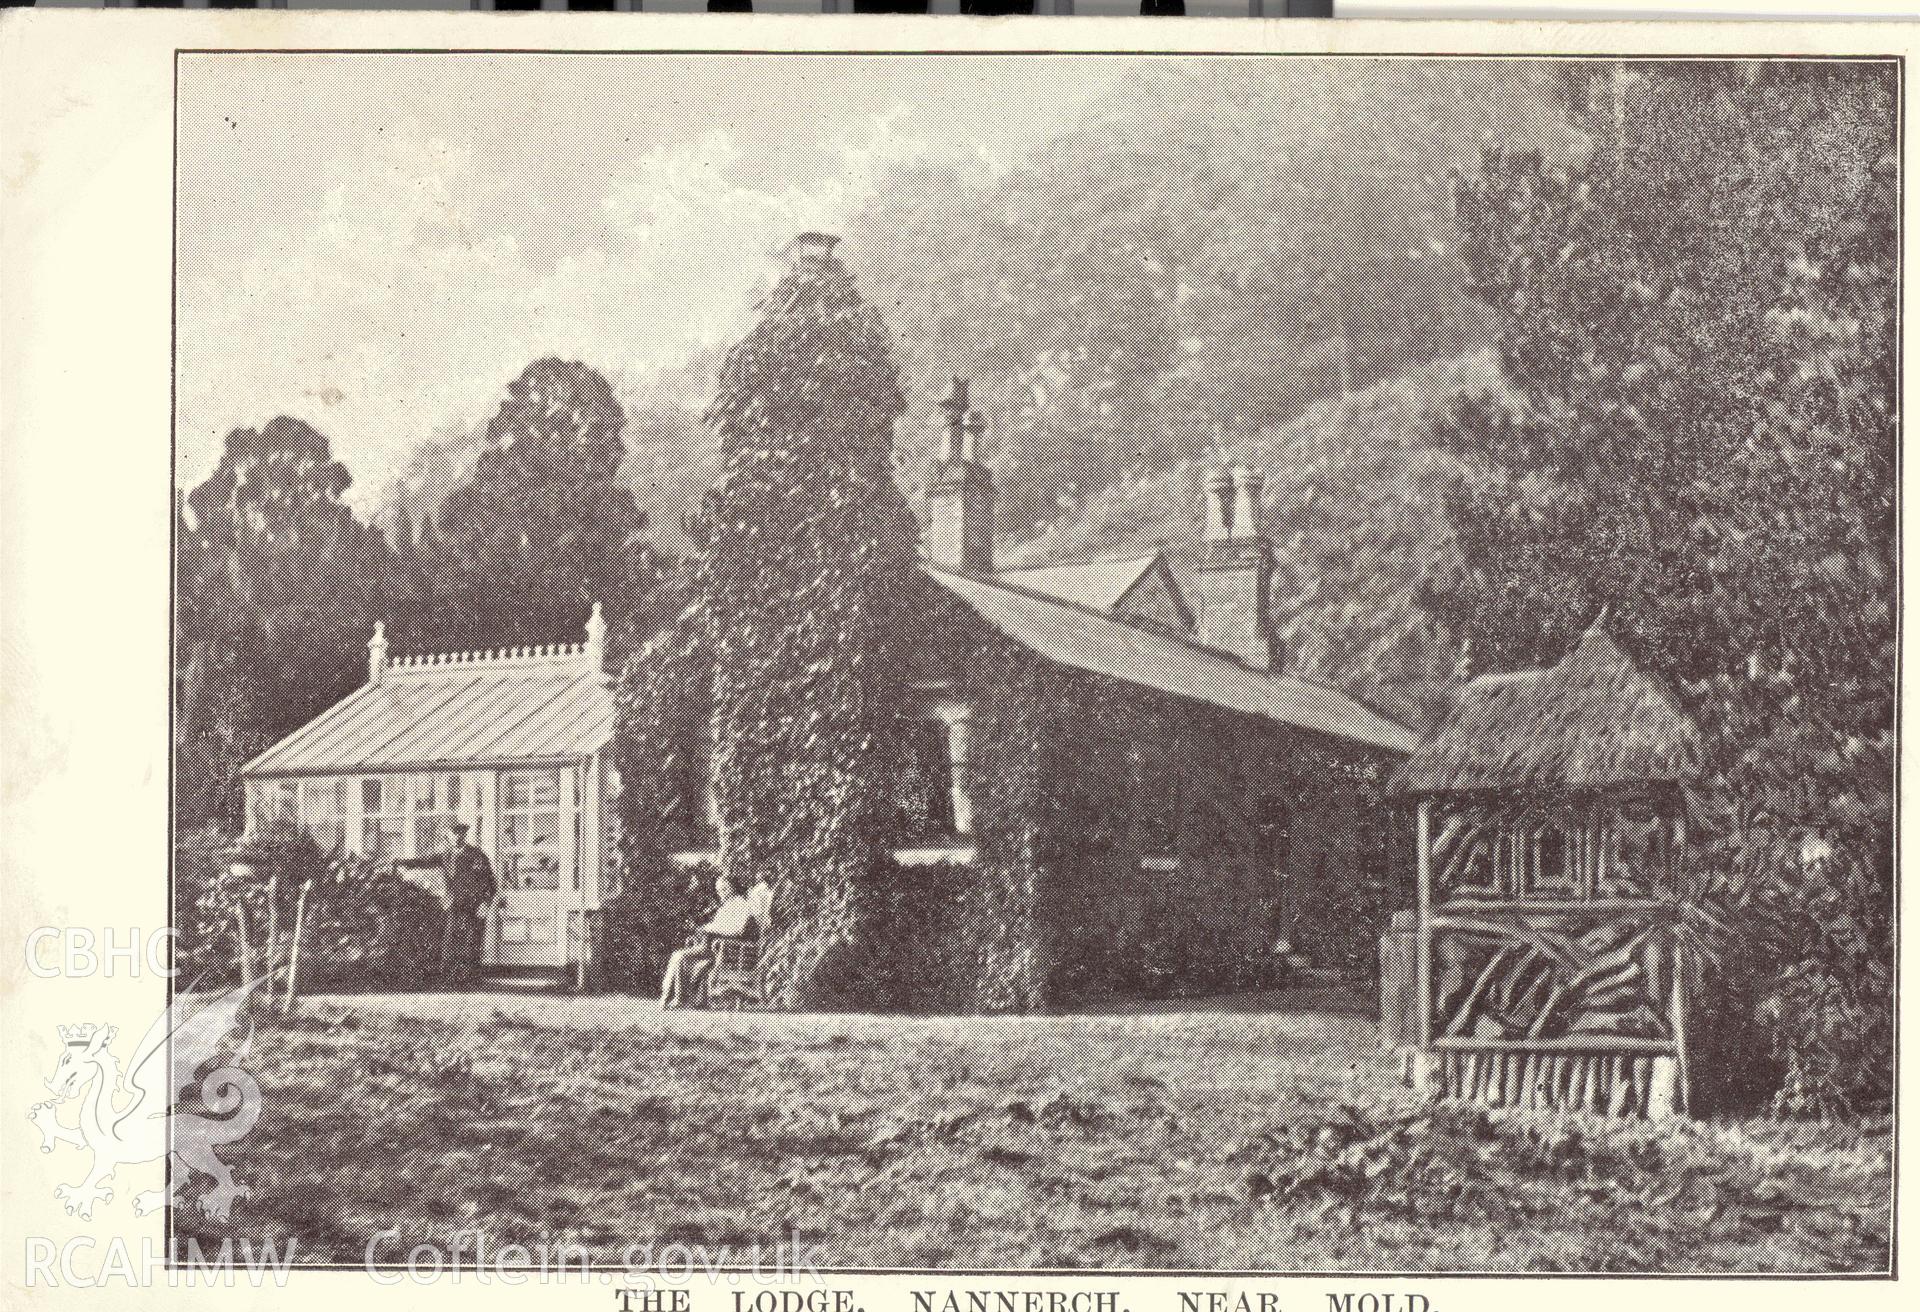 Digitised postcard image of unidentified lodge at Penbedw, Nannerch. Produced by Parks and Gardens Data Services, from an original item in the Peter Davis Collection at Parks and Gardens UK. We hold only web-resolution images of this collection, suitable for viewing on screen and for research purposes only. We do not hold the original images, or publication quality scans.